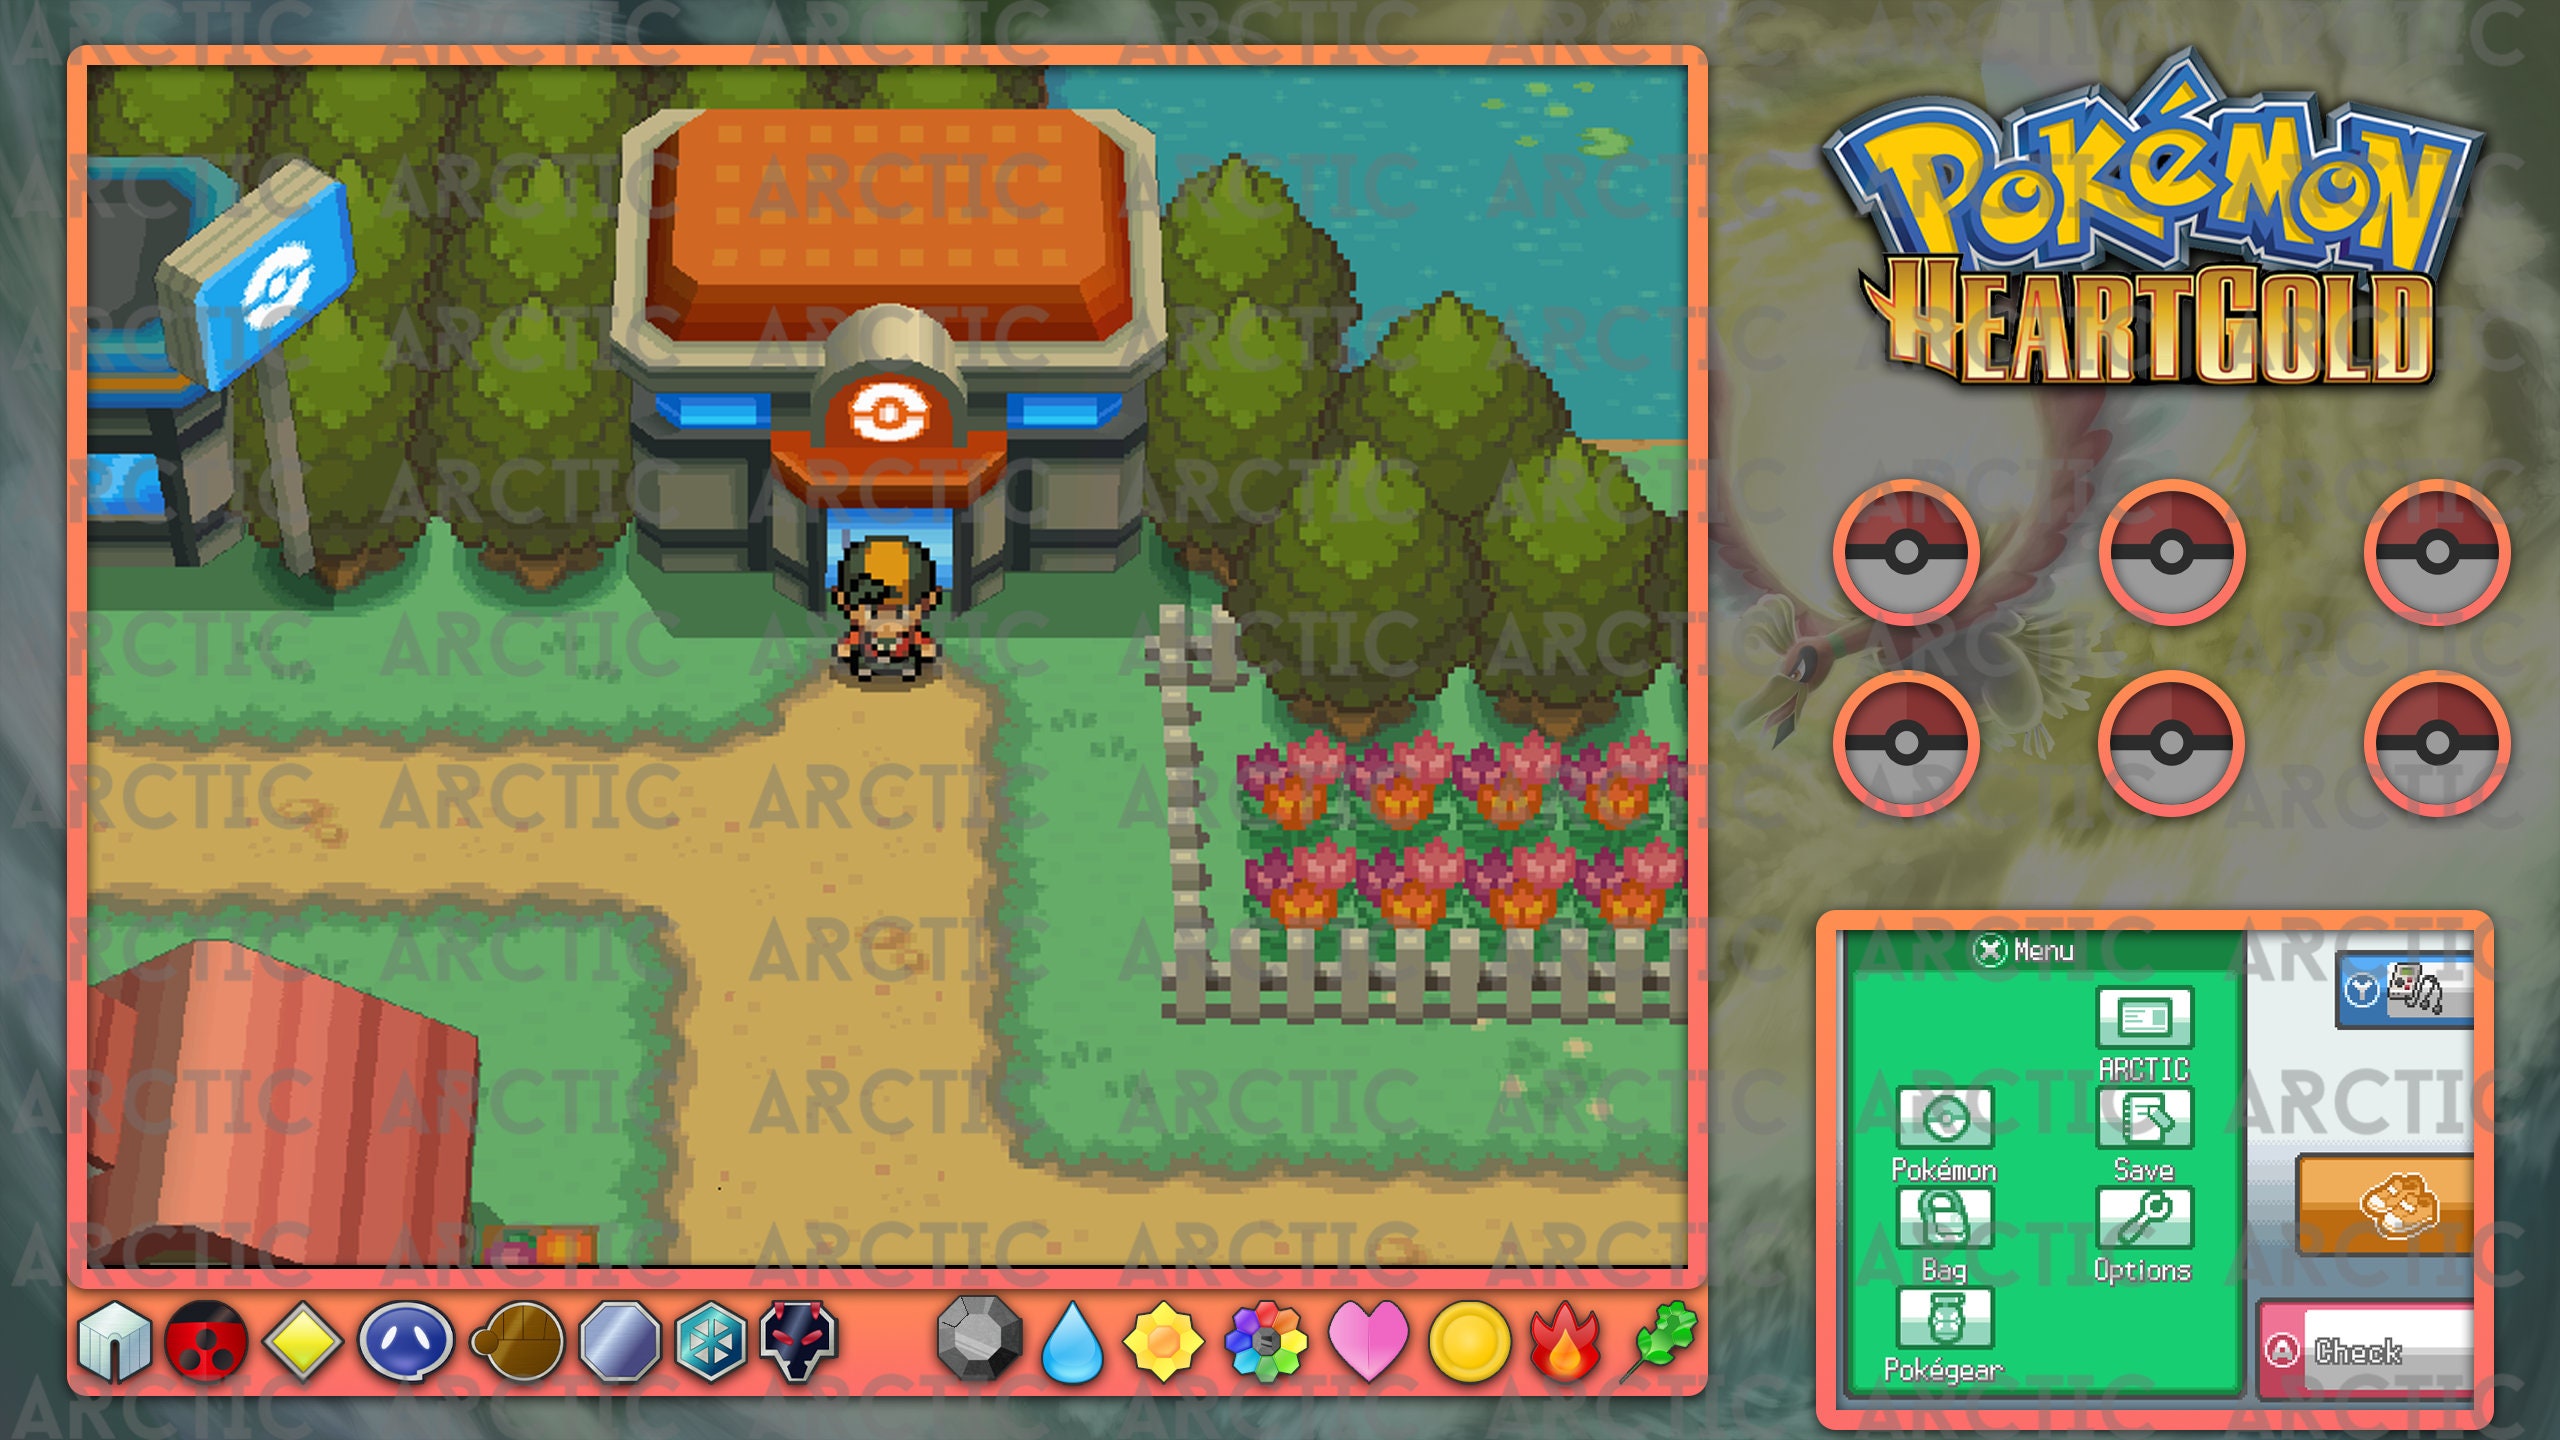 Pokémon Heartgold Overlay/layout for /twitch -  Sweden